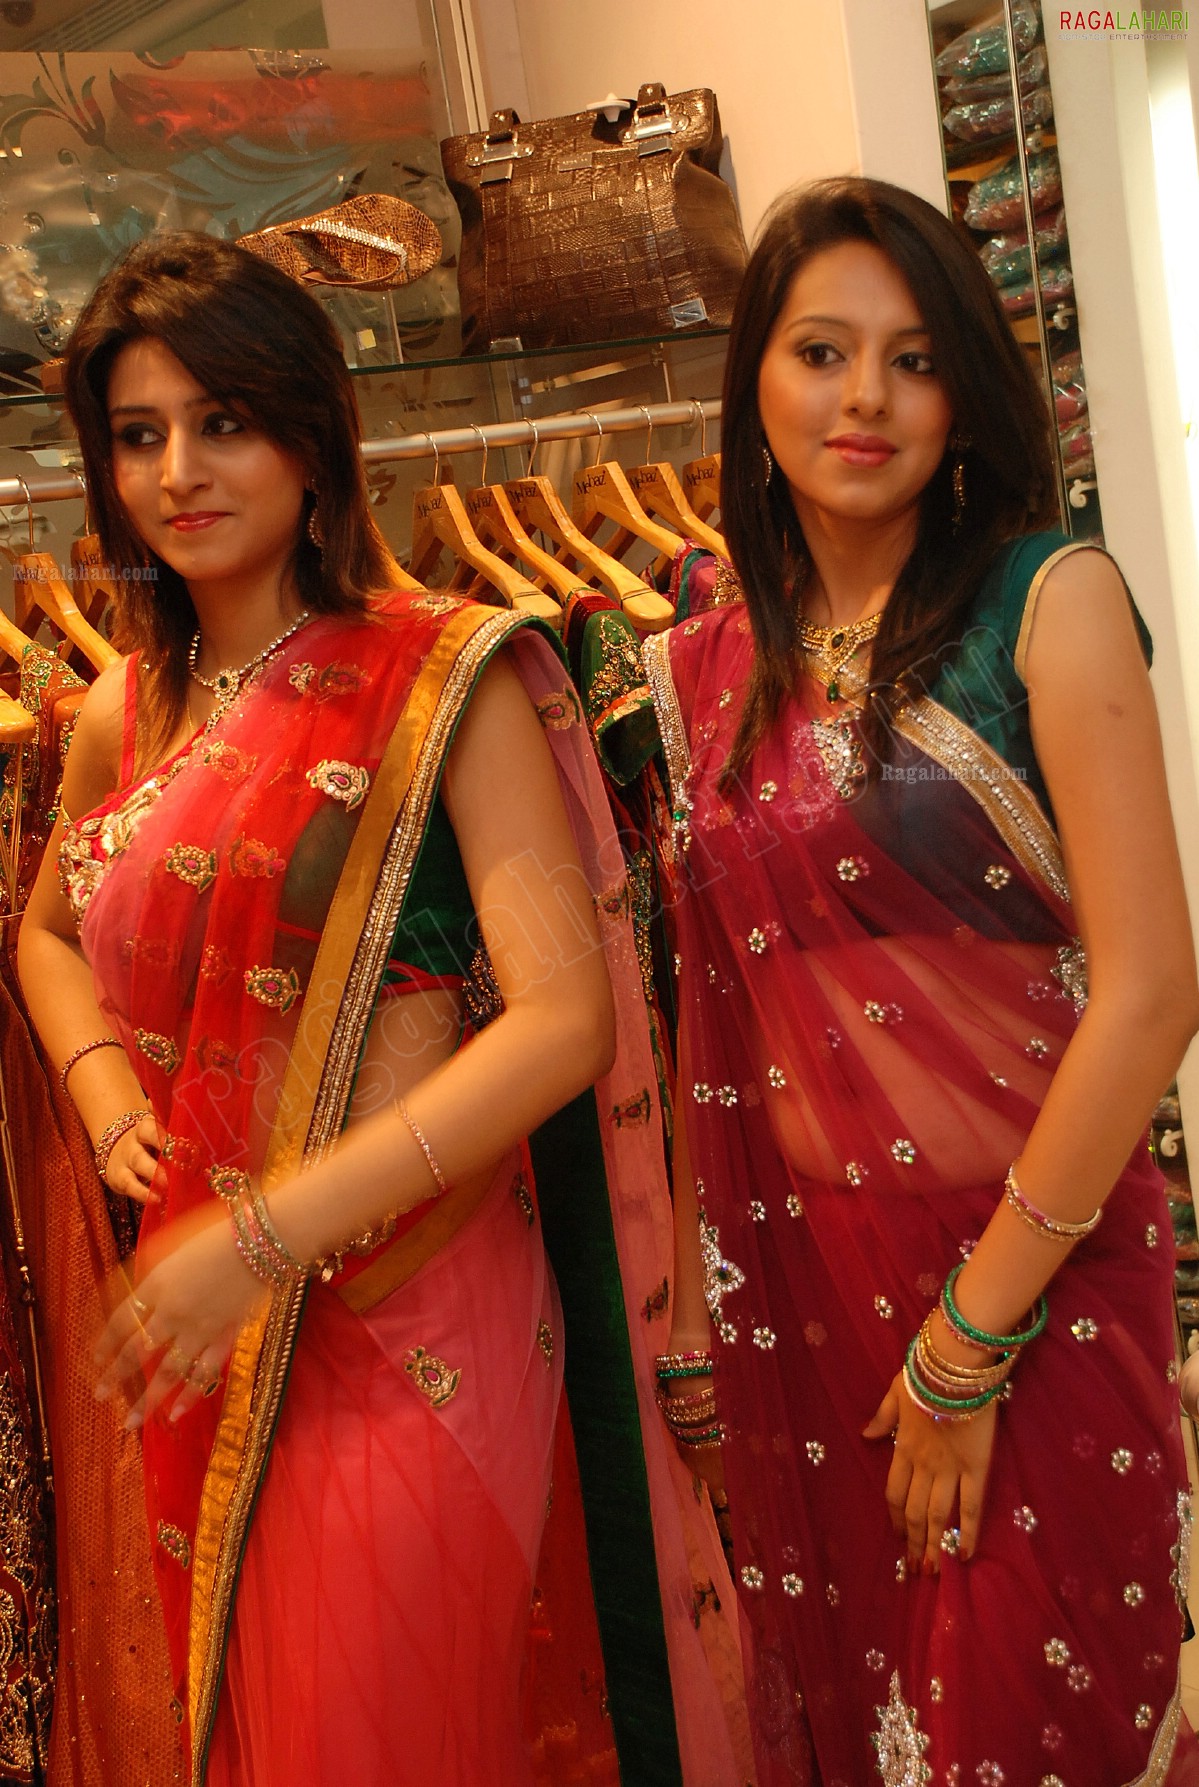 Launch of Festival & Designer Wedding Collection 2011 at Mebaz